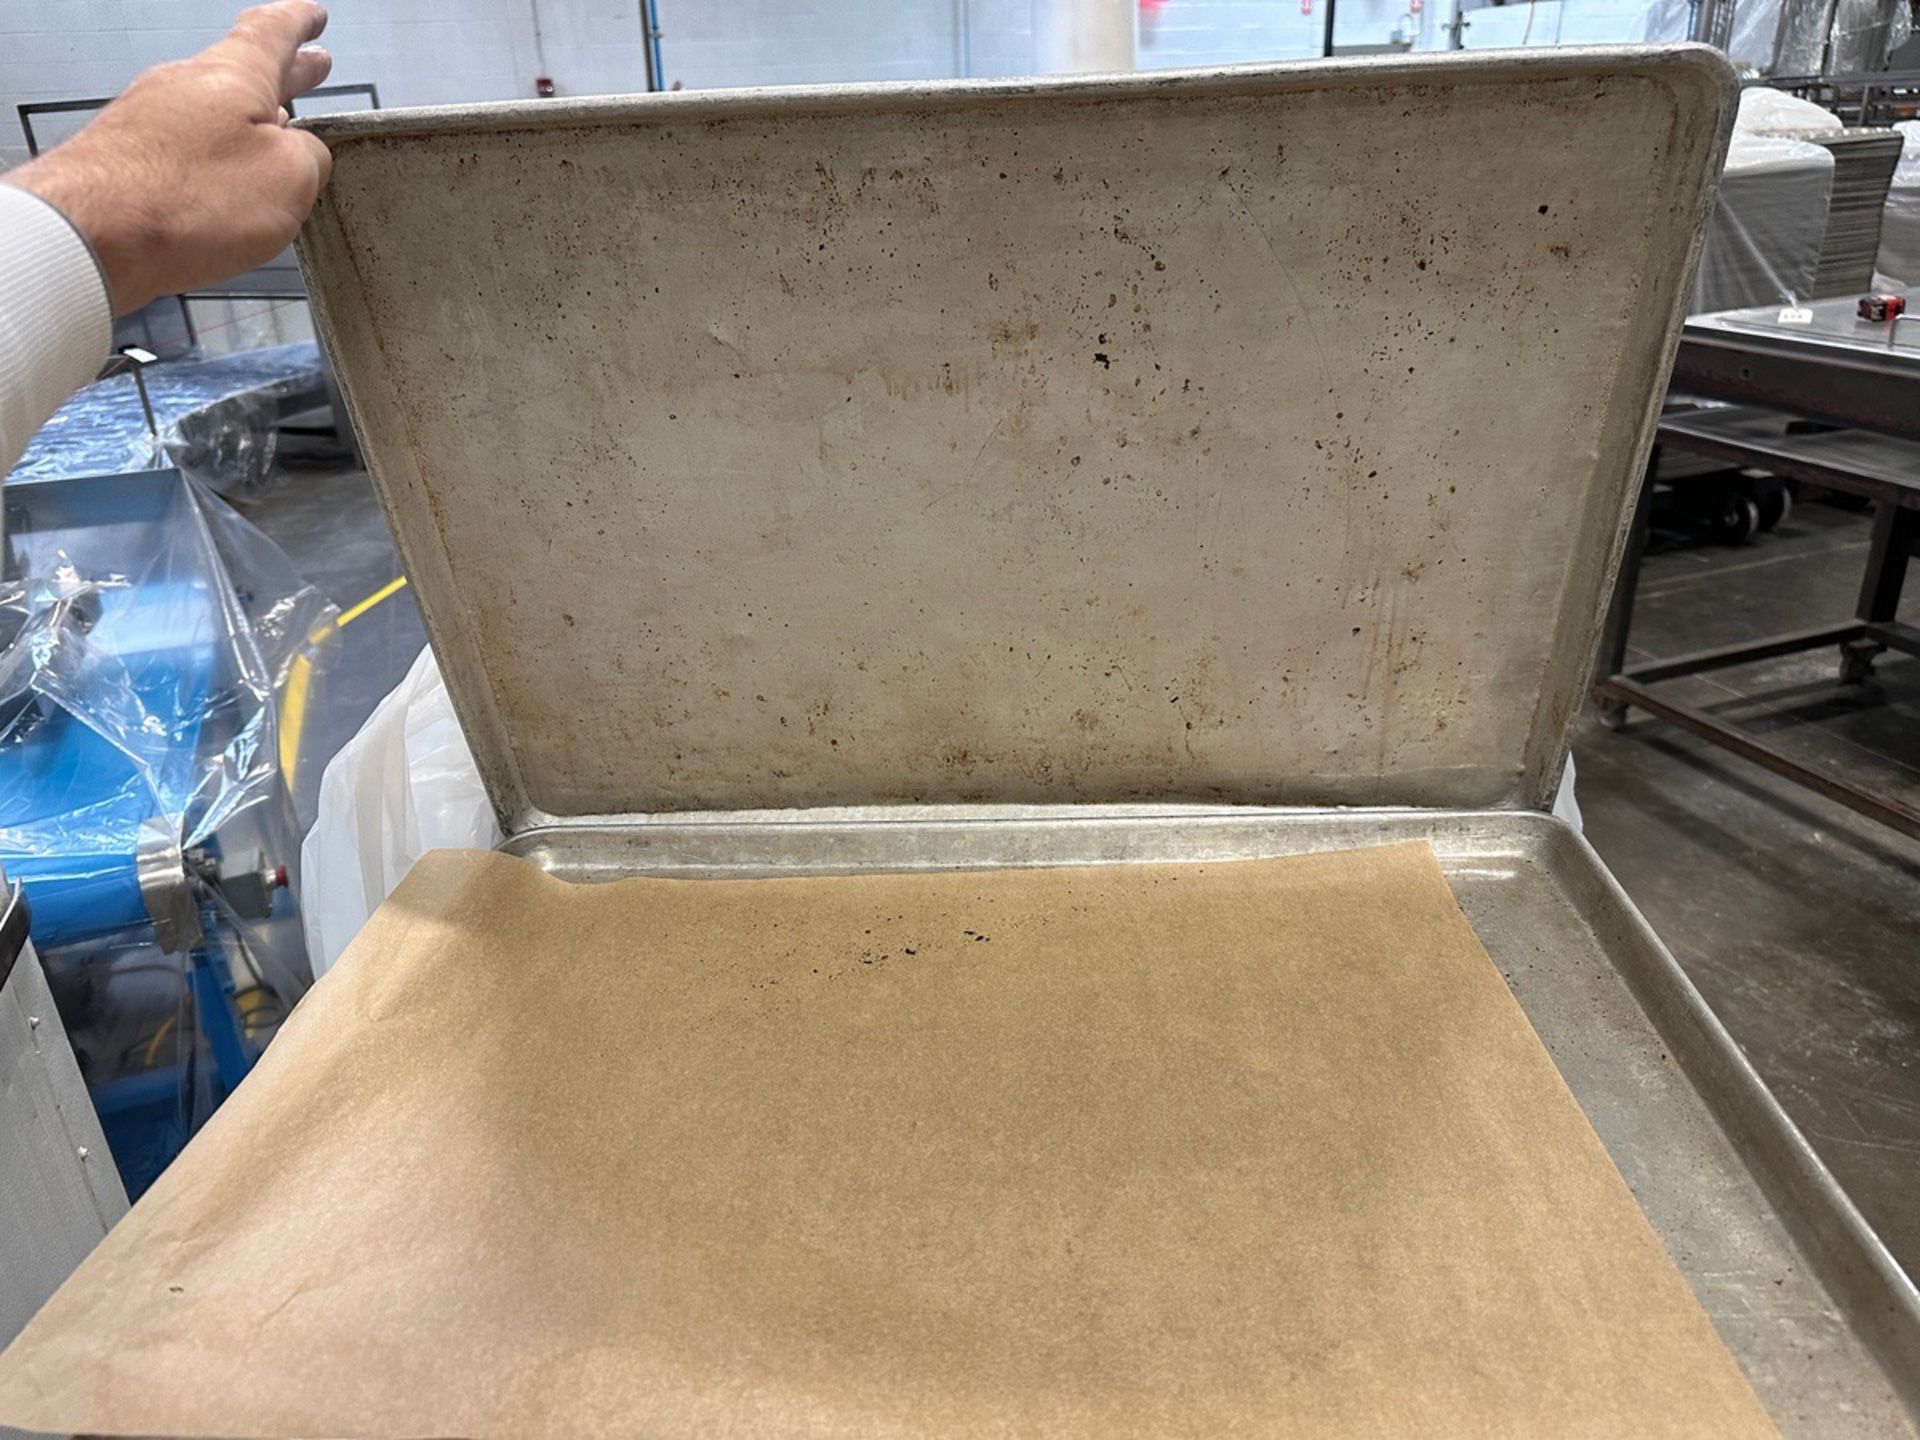 Approx. (330) Sheet Trays on Heavy Duty Pan Cart (Approx. 18" x 26") | Rig Fee $50 - Image 2 of 2